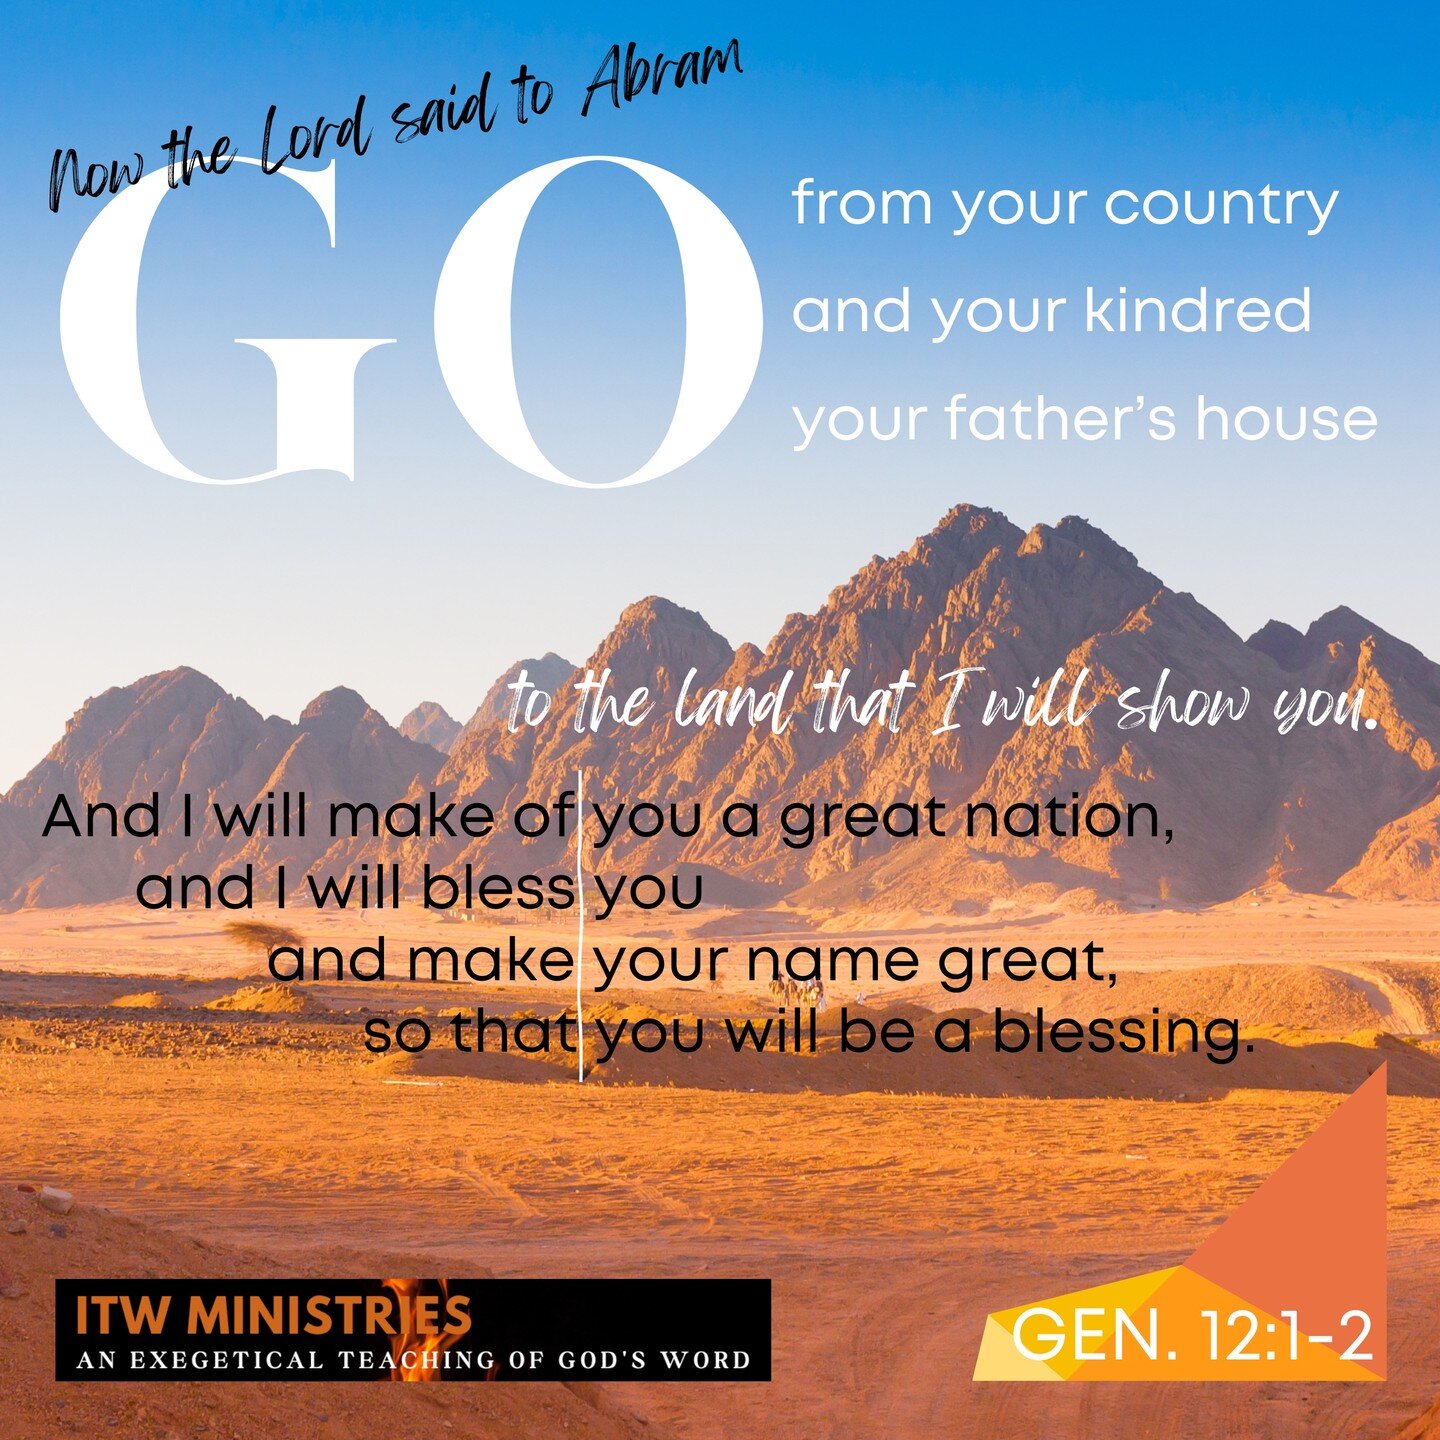 Now the Lord said to Abram, &quot;Go from your country and your kindred and your father's house to the land that I will show you. And I will make of you a great nation, and I will bless you and make your name great, so that you will be a blessing. I 